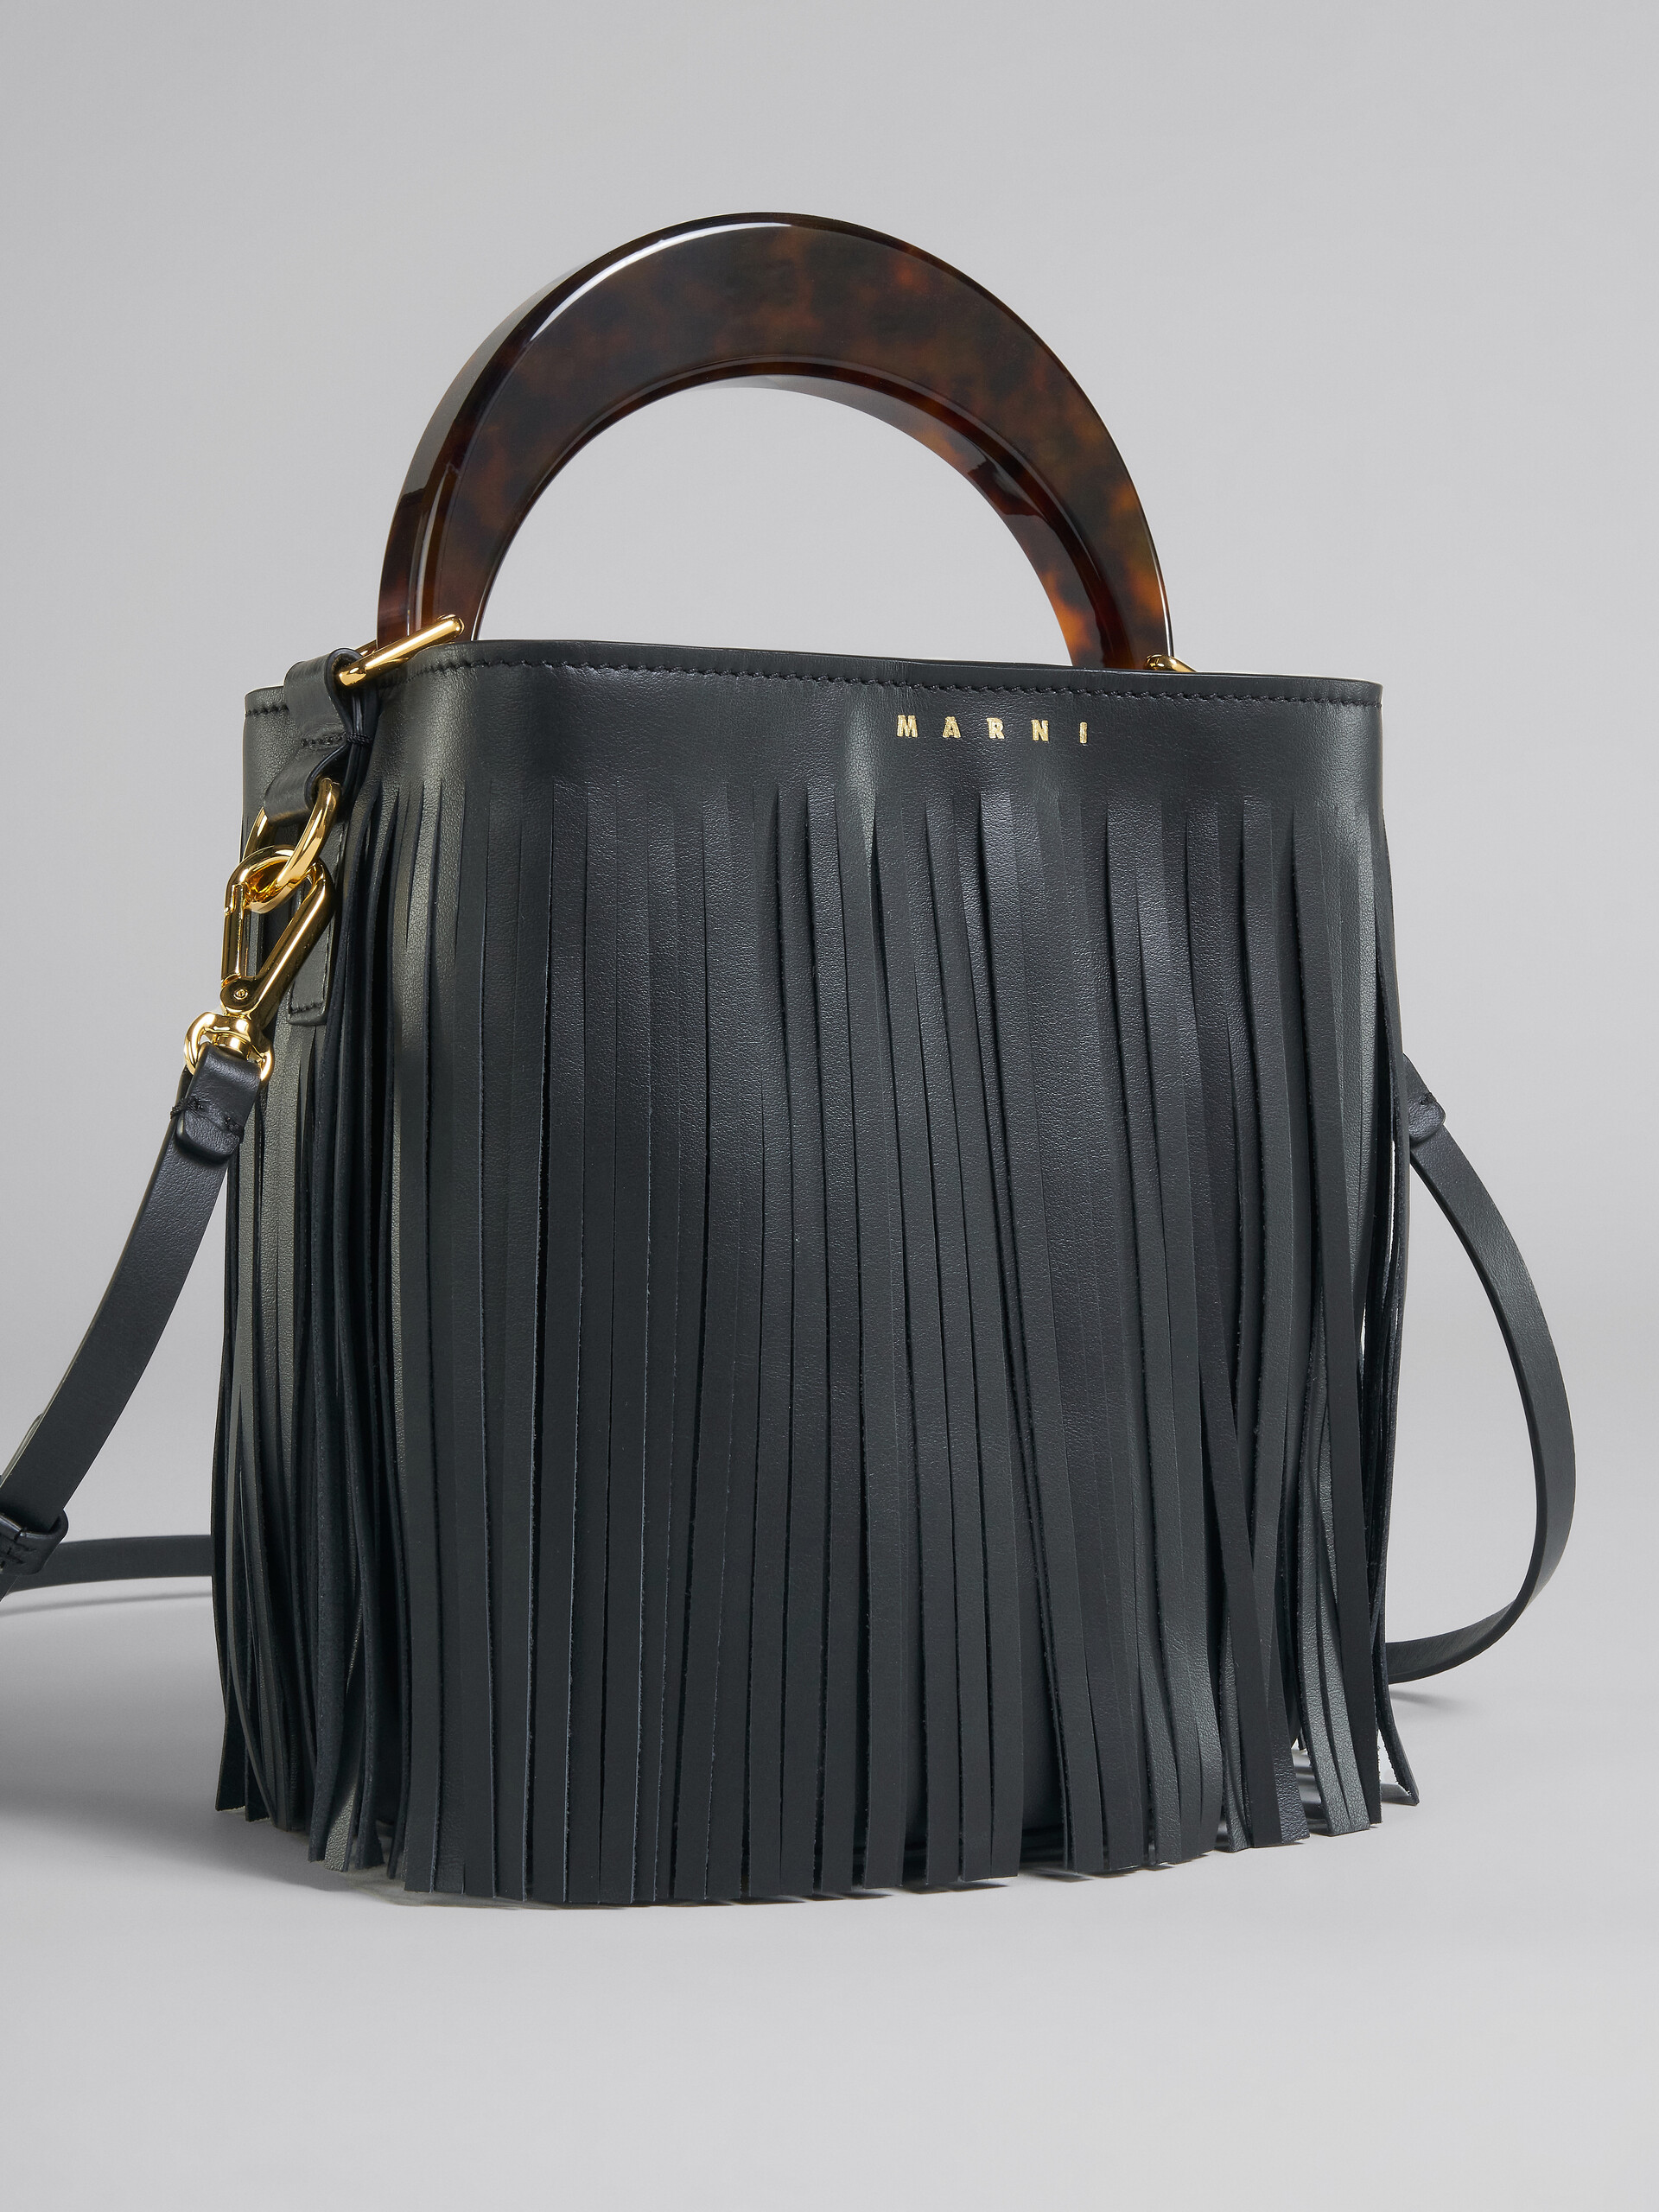 Venice Small Bucket in black leather with fringes - Shoulder Bag - Image 5